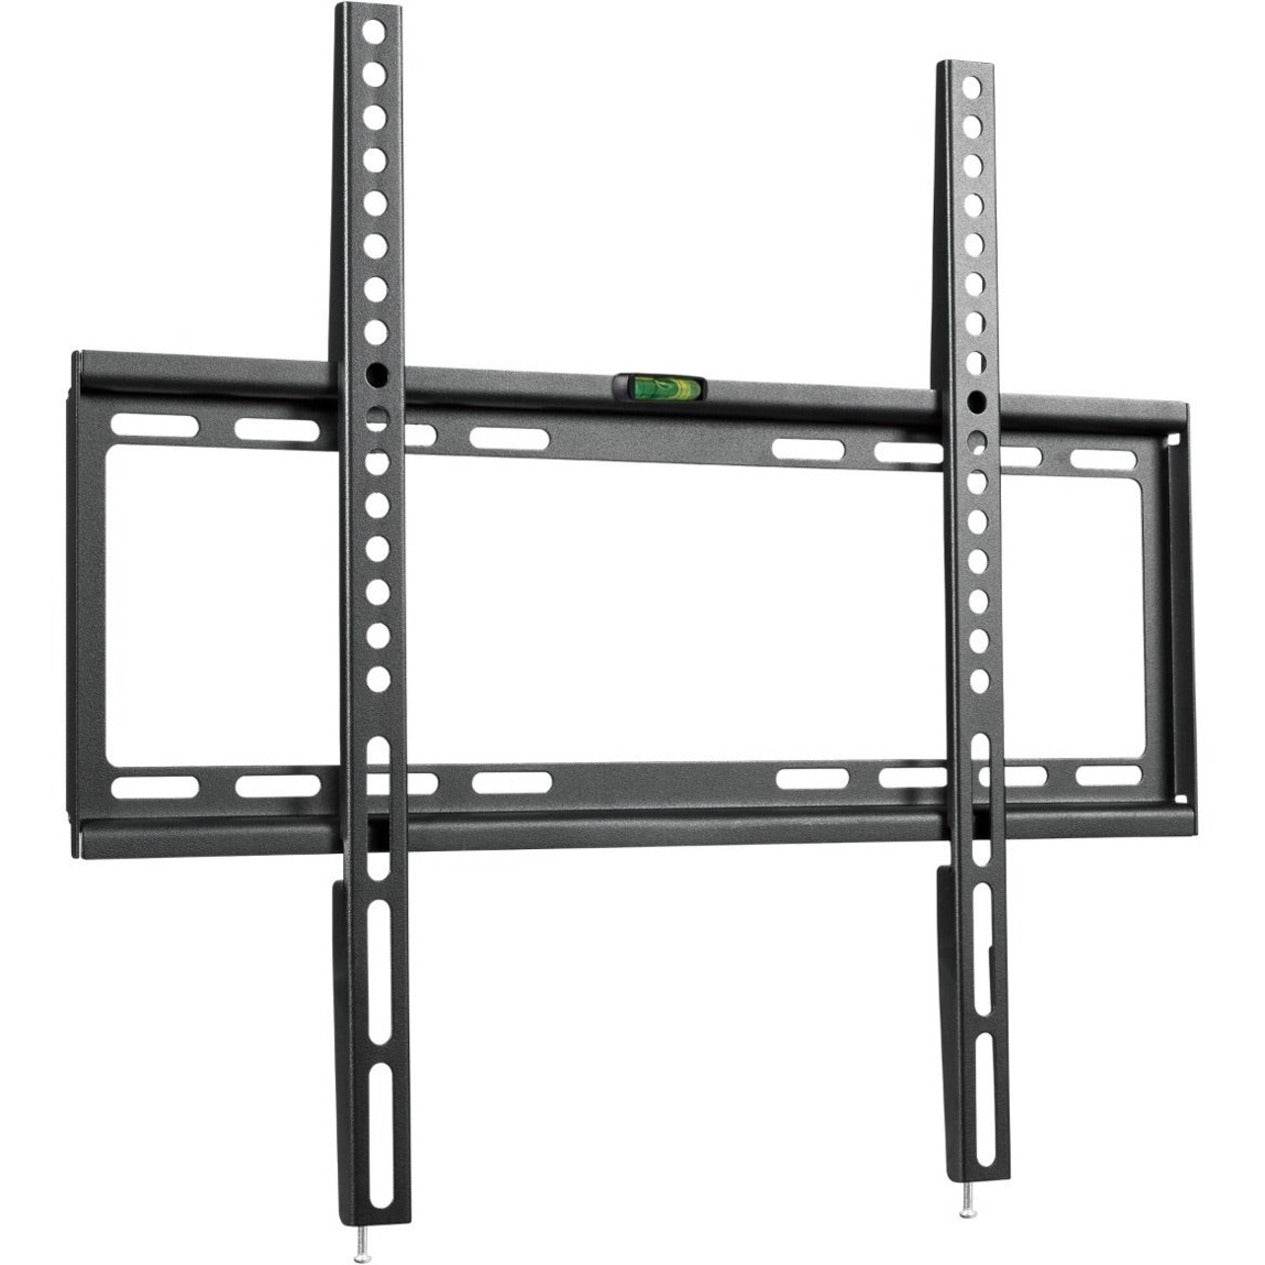 GPX TM15B Fixed Flat Panel TV Mount - Wall Mount for Flat Panel Display, Black, 66 lb Maximum Load Capacity, 50" Maximum Screen Size Supported